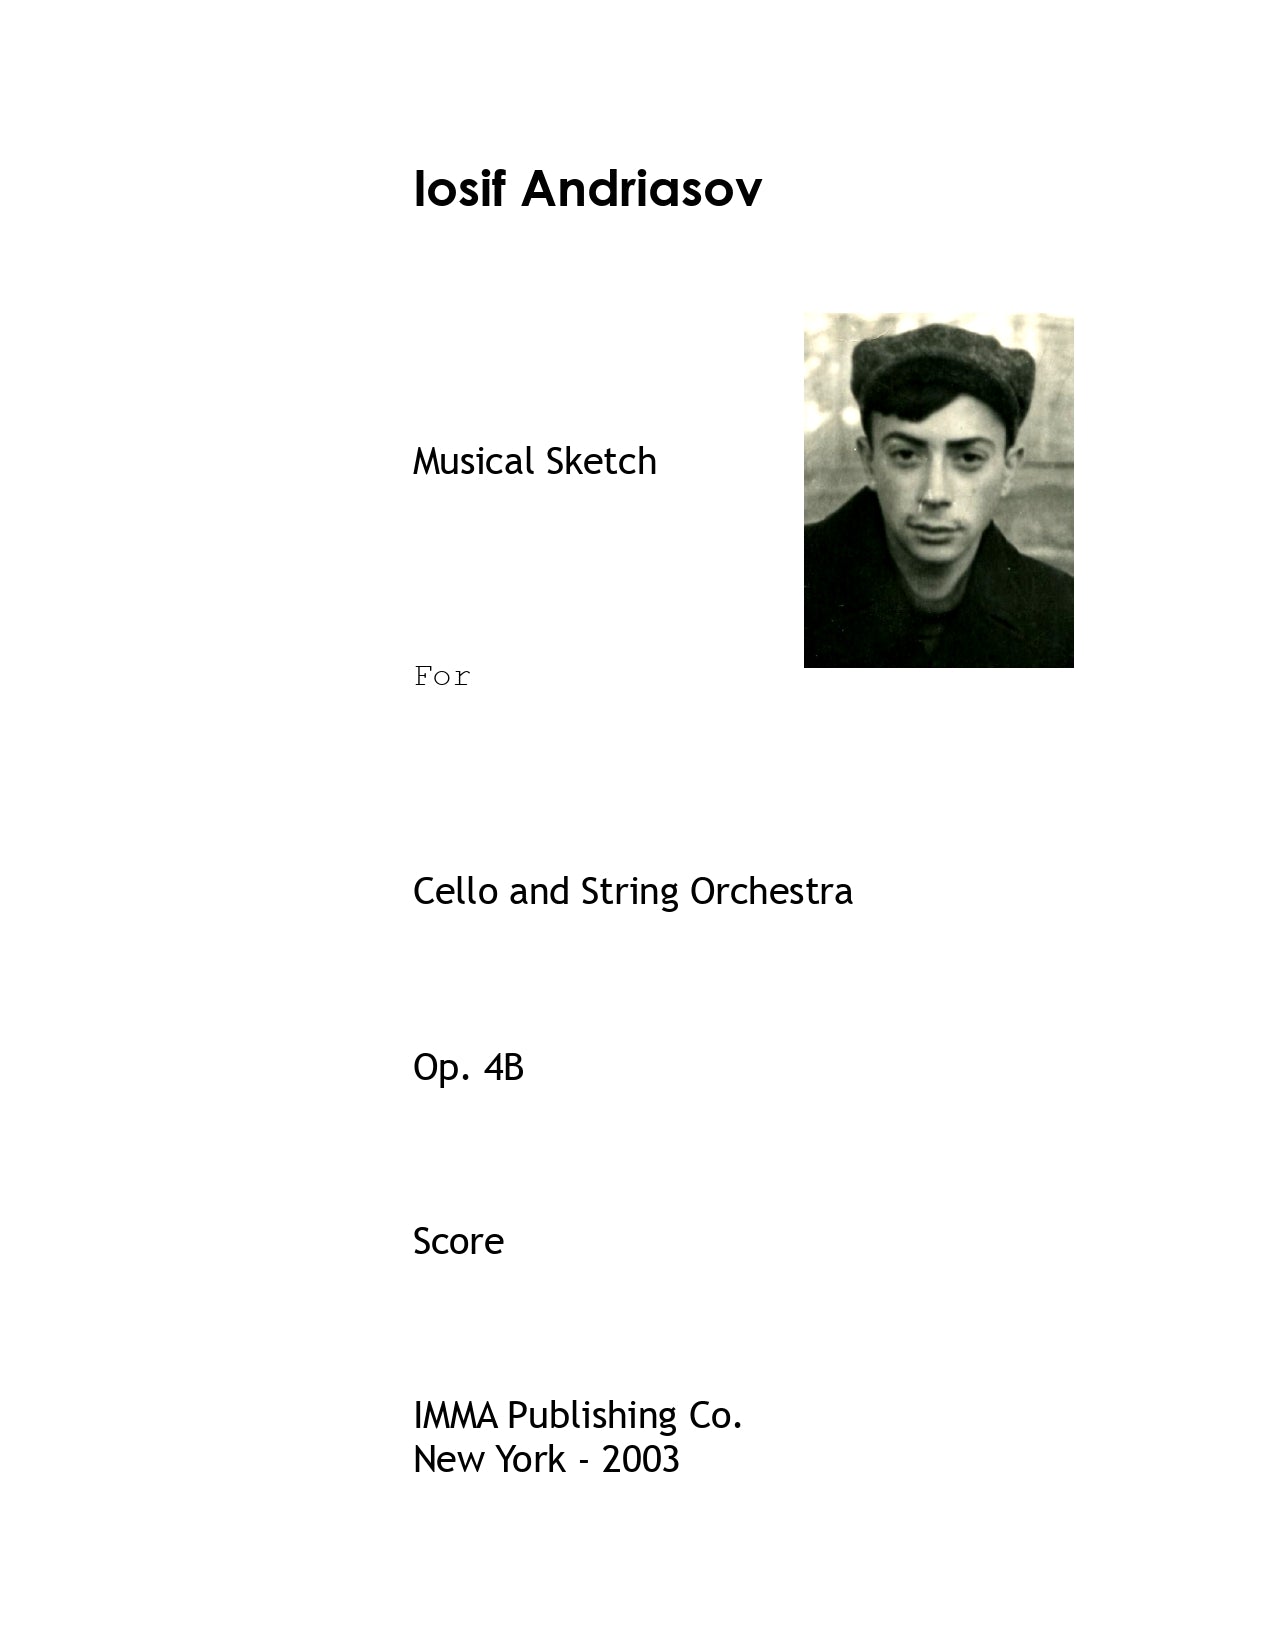 010. Iosif Andriasov - Musical Sketch, Op. 4B for Cello and String Orchestra.